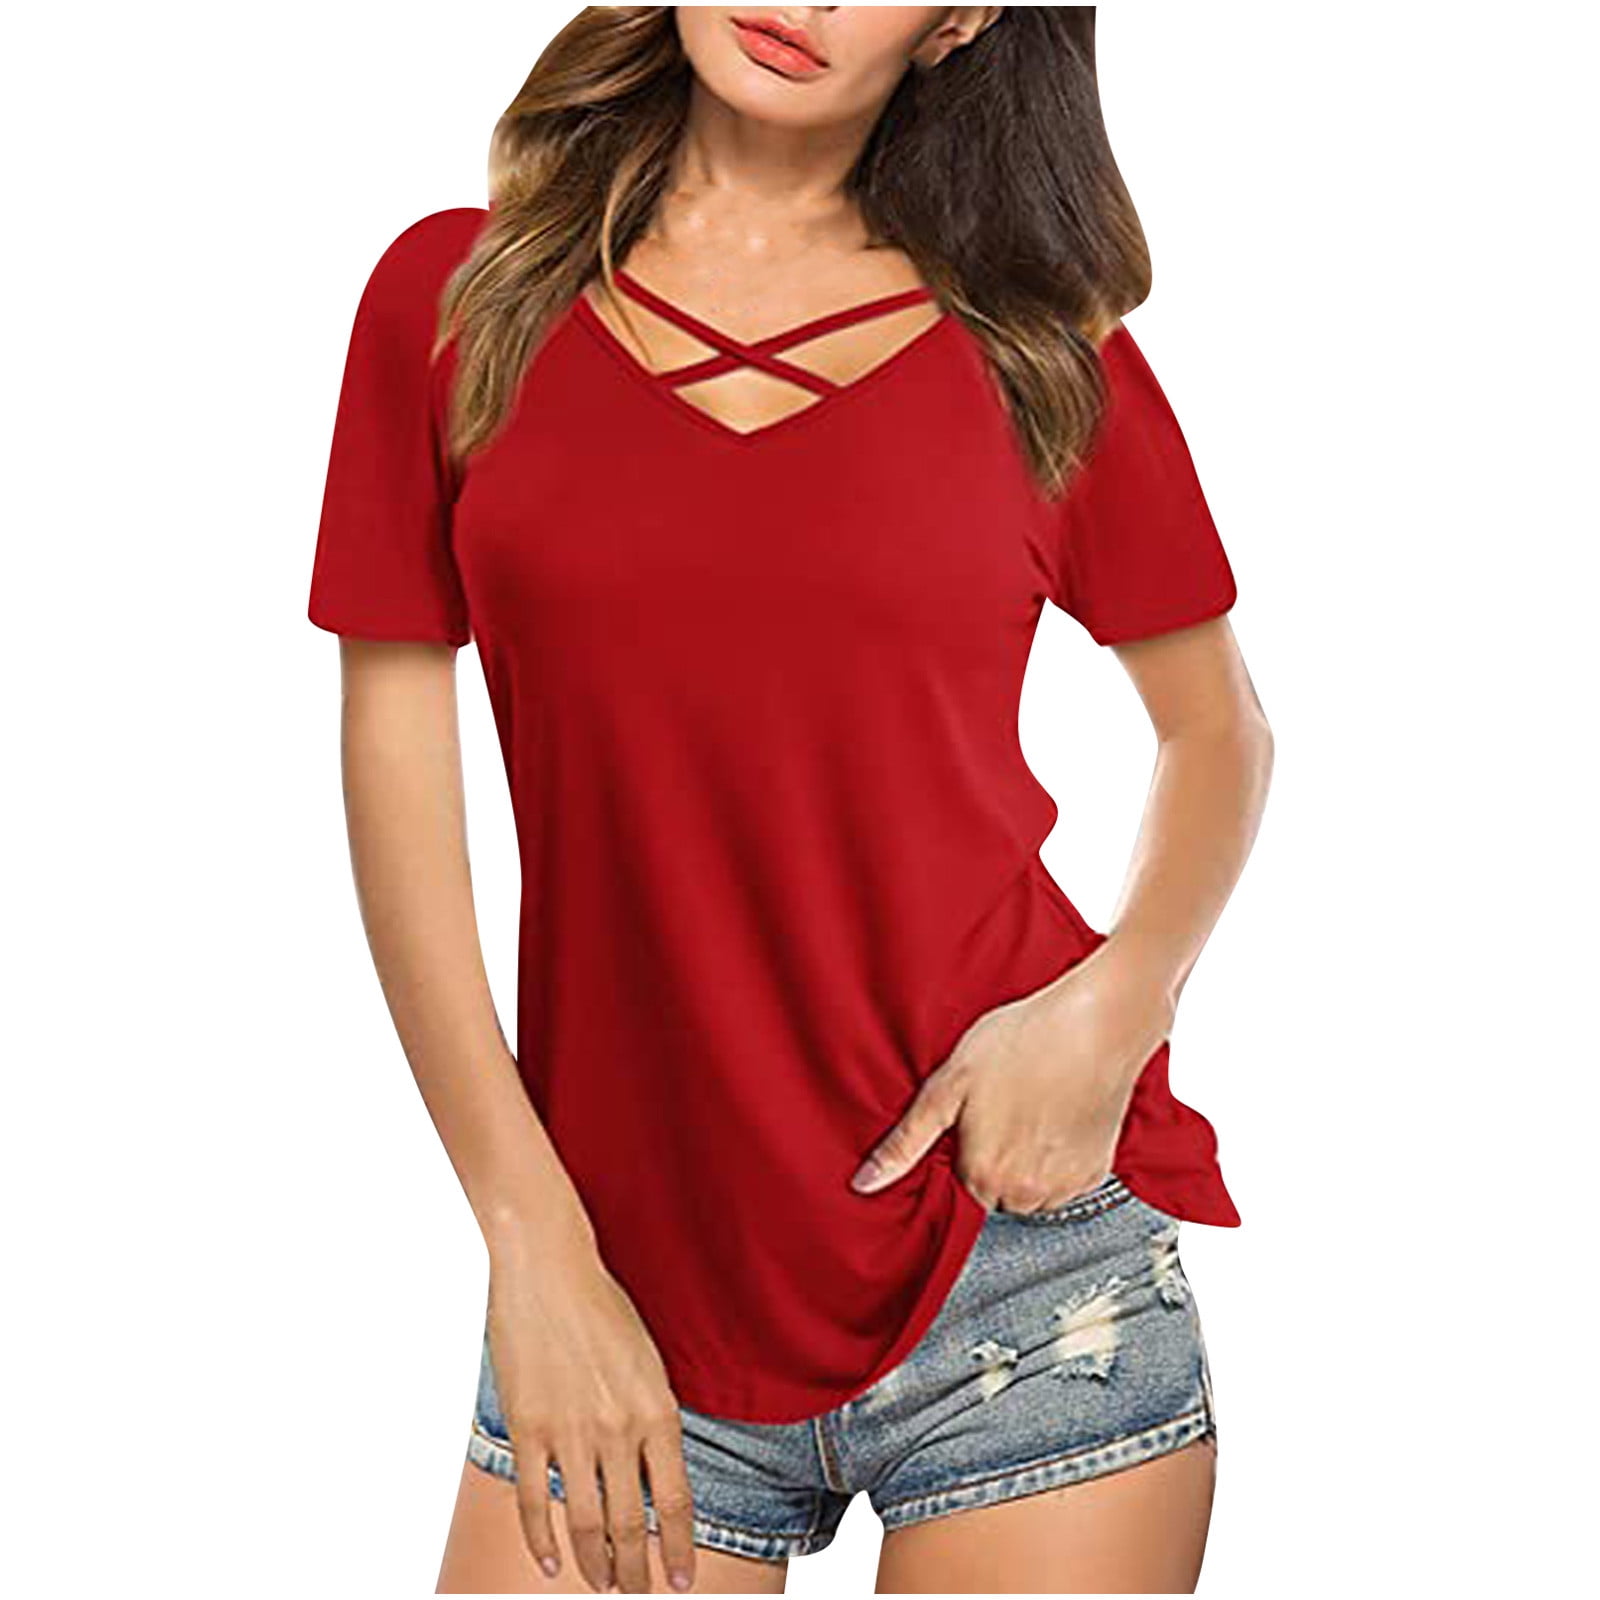 Giftesty Womens Plus Size Clearance Women Tops V-neck Cross Collar ...